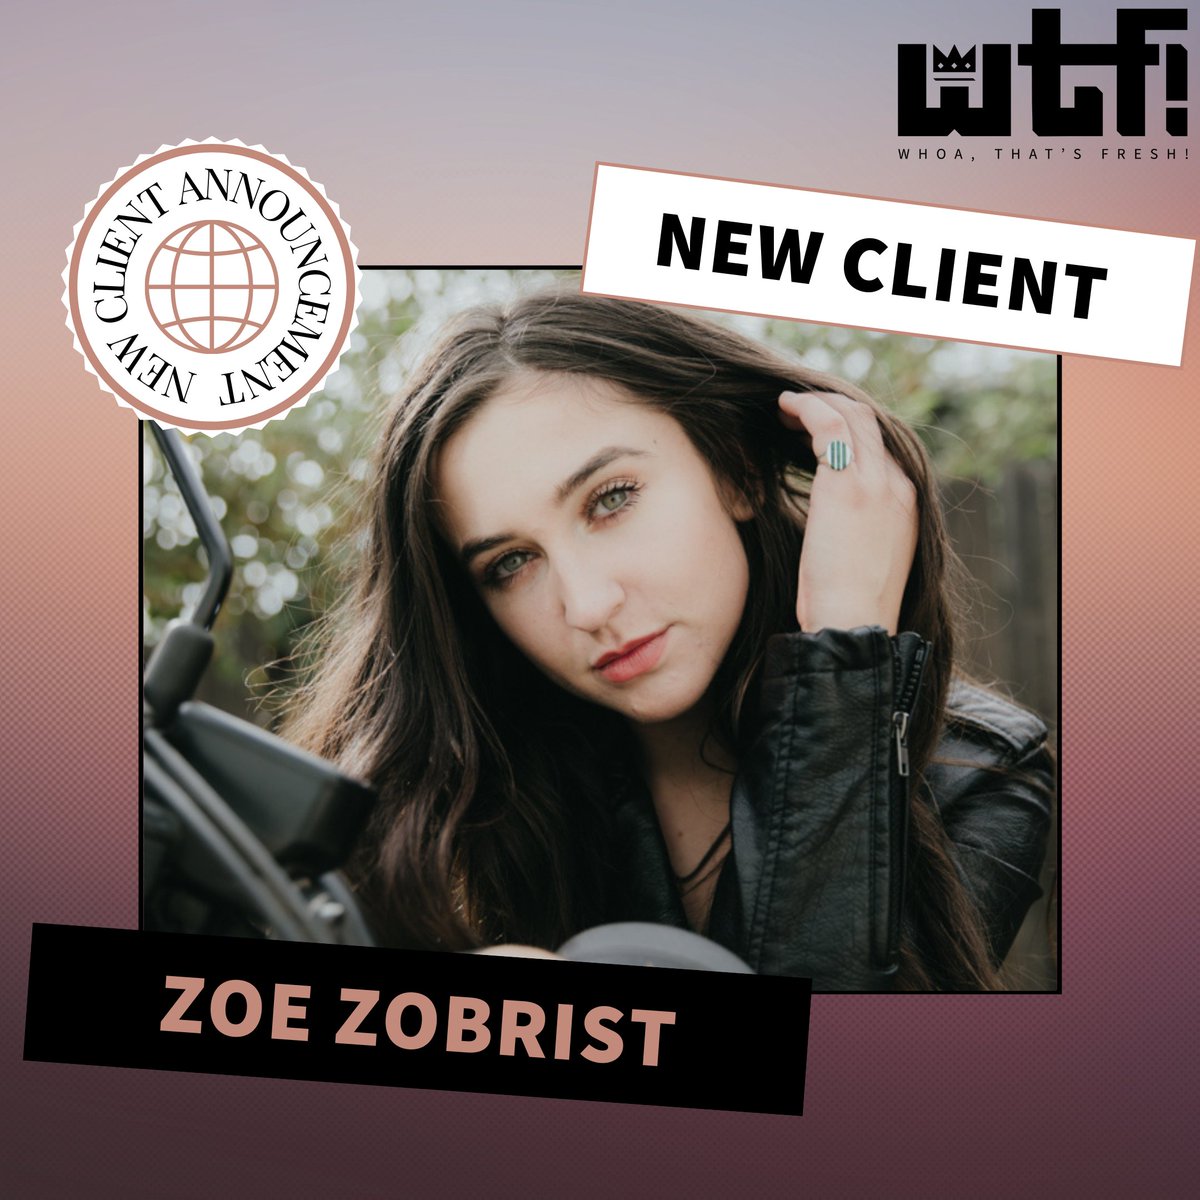 Sending a huge welcome to @zoezobrist who has joined the WTF! fam! Make sure to keep an eye out for new music coming soon!